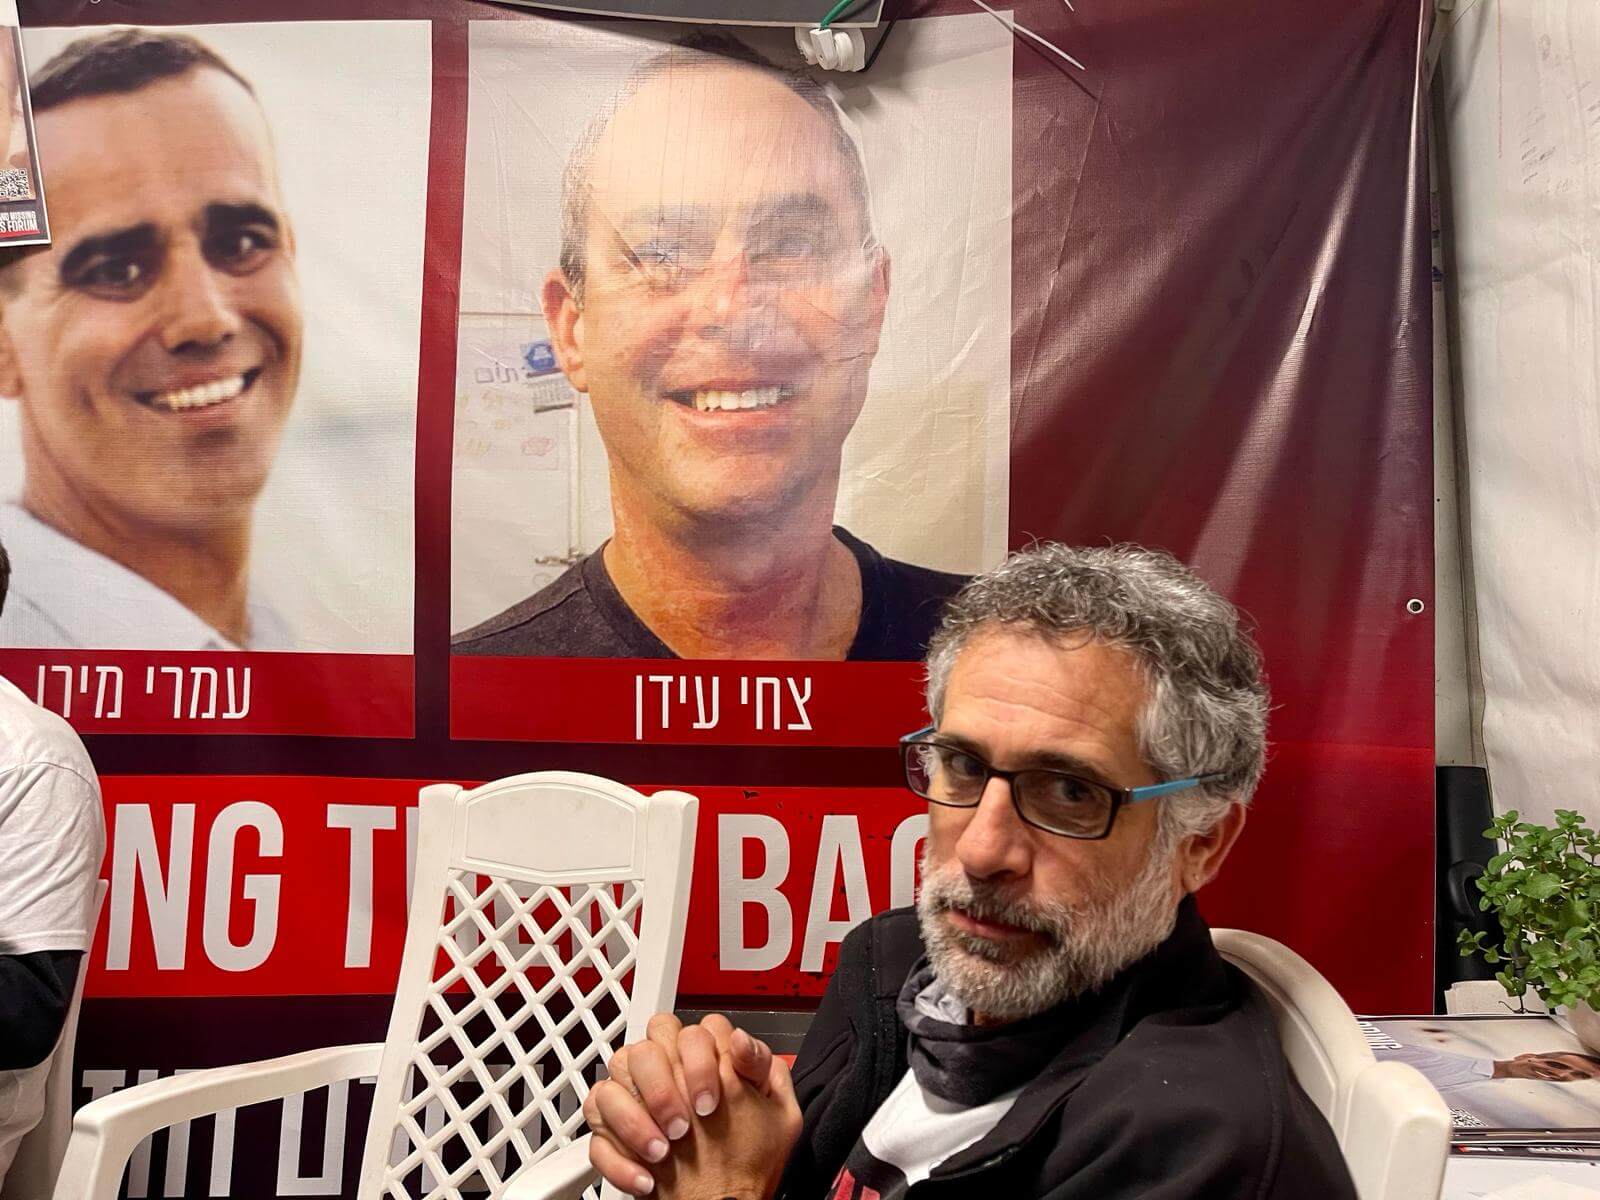 Motti Gerlic grew up on Kibbutz Nahal Oz with Tsahi Idan, who is still in captivity. Gerlic said the country betrayed his friend and all others by not ensuring their safety on October 7.